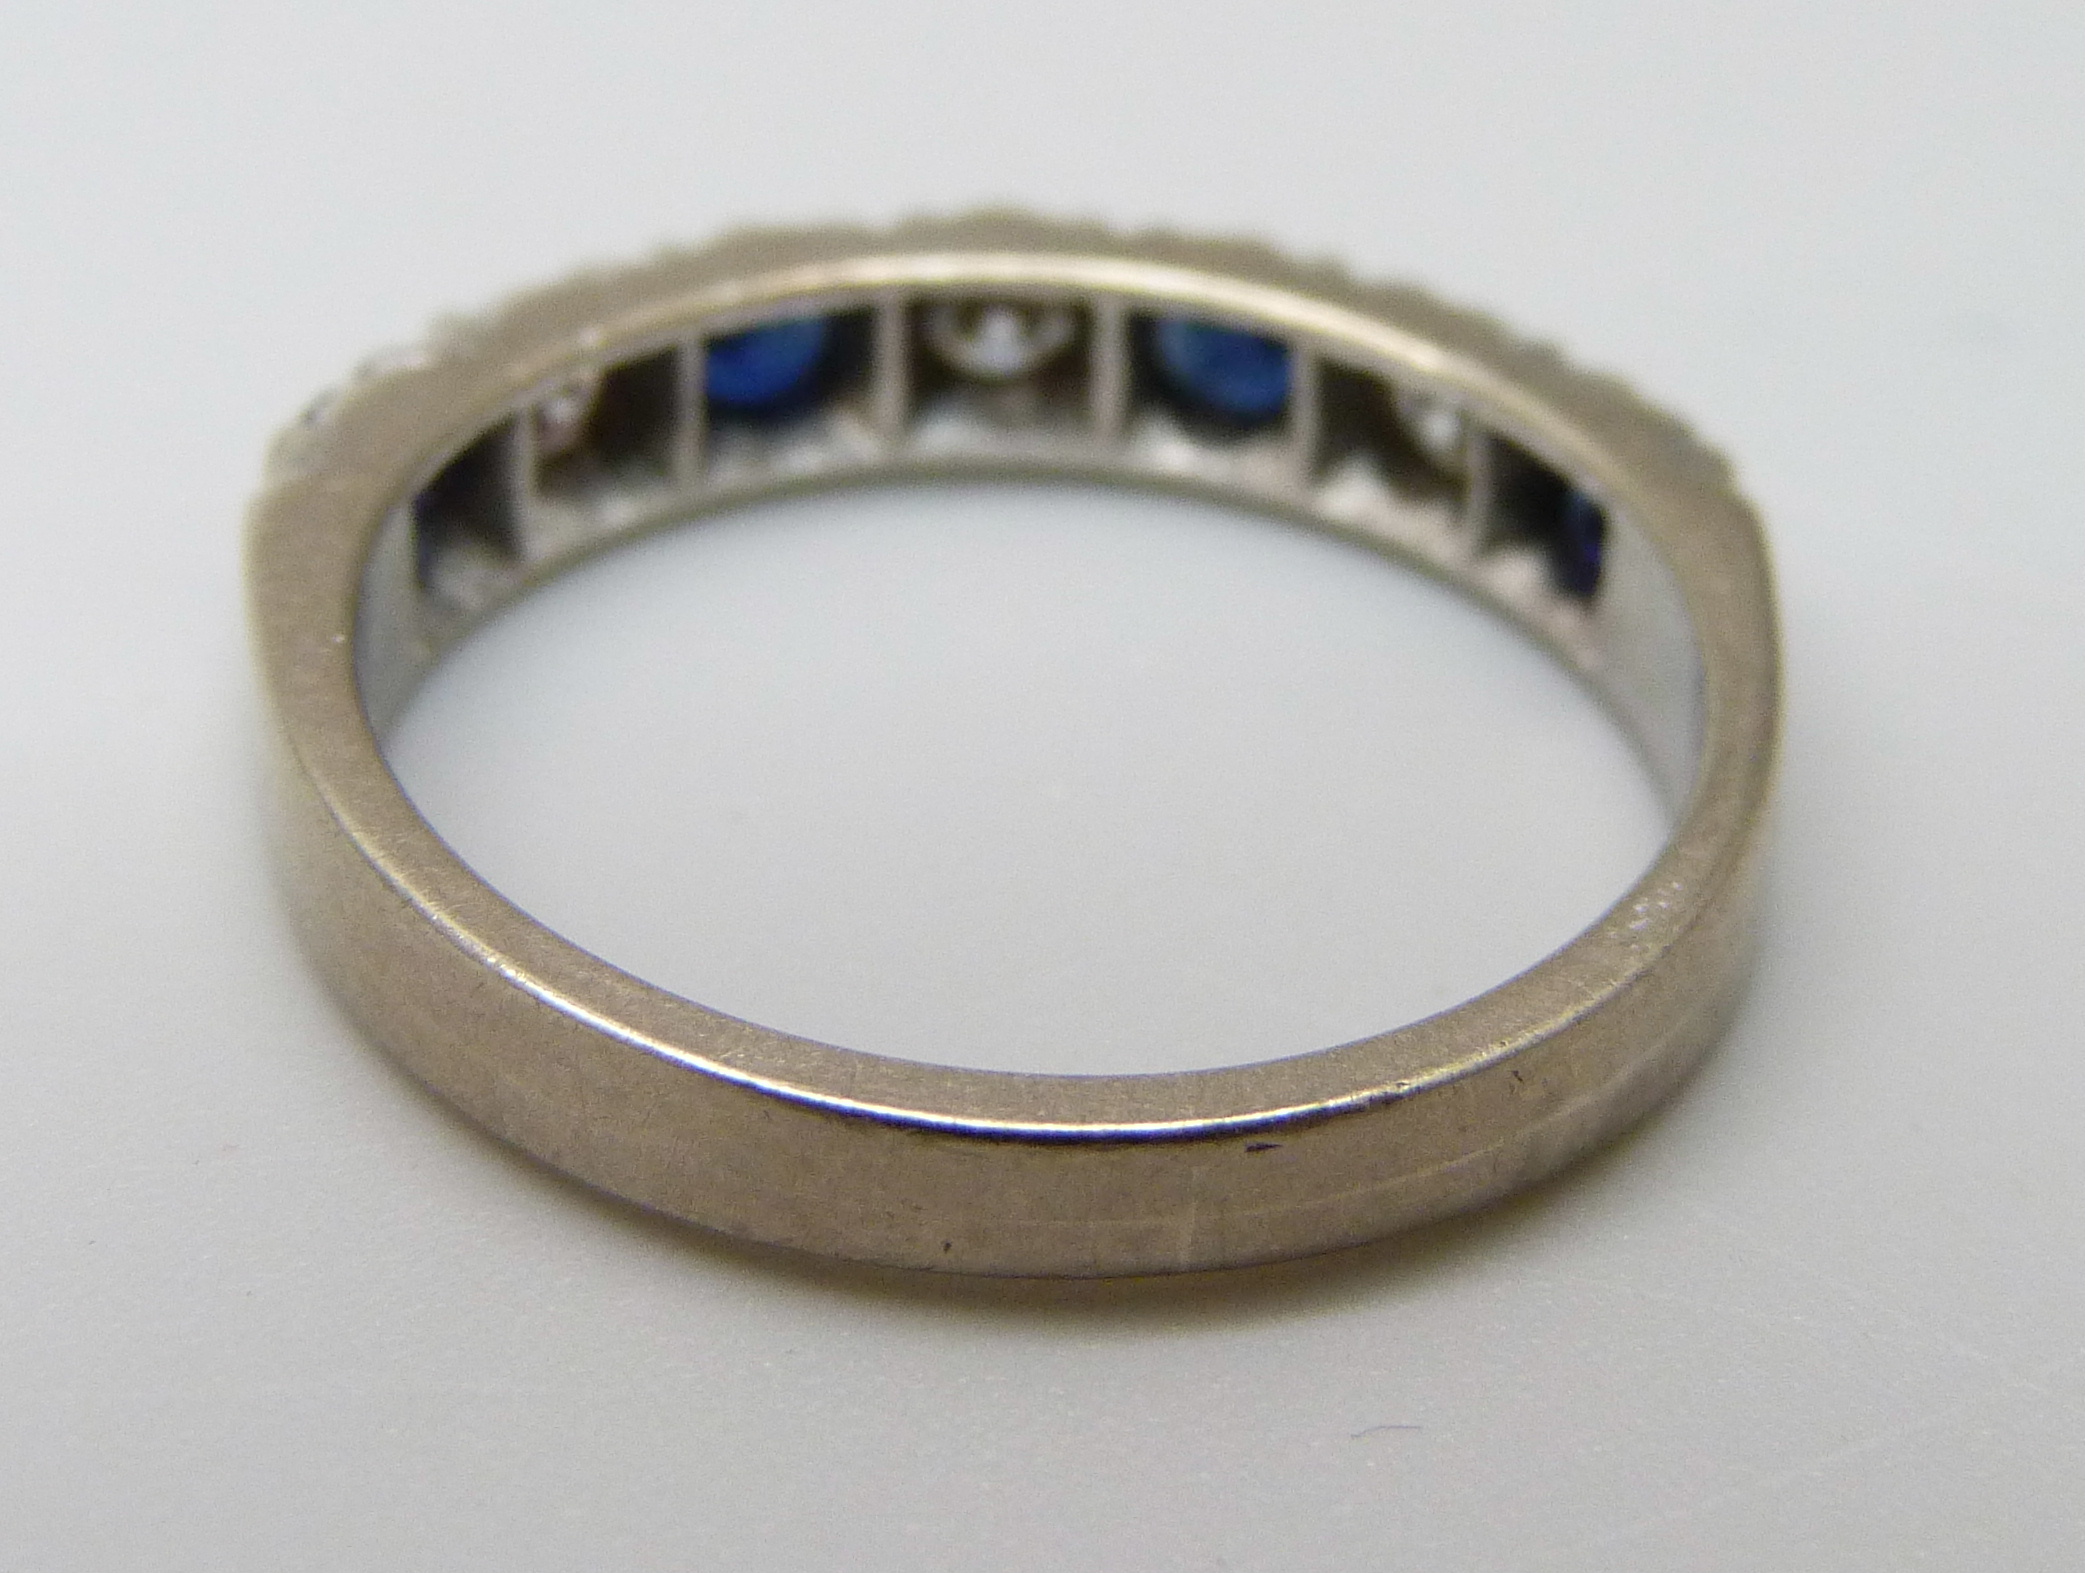 An 18ct white gold, diamond and sapphire ring, Sheffield 1977, 5.1g, Q, over 0.5ct total diamond - Image 3 of 3